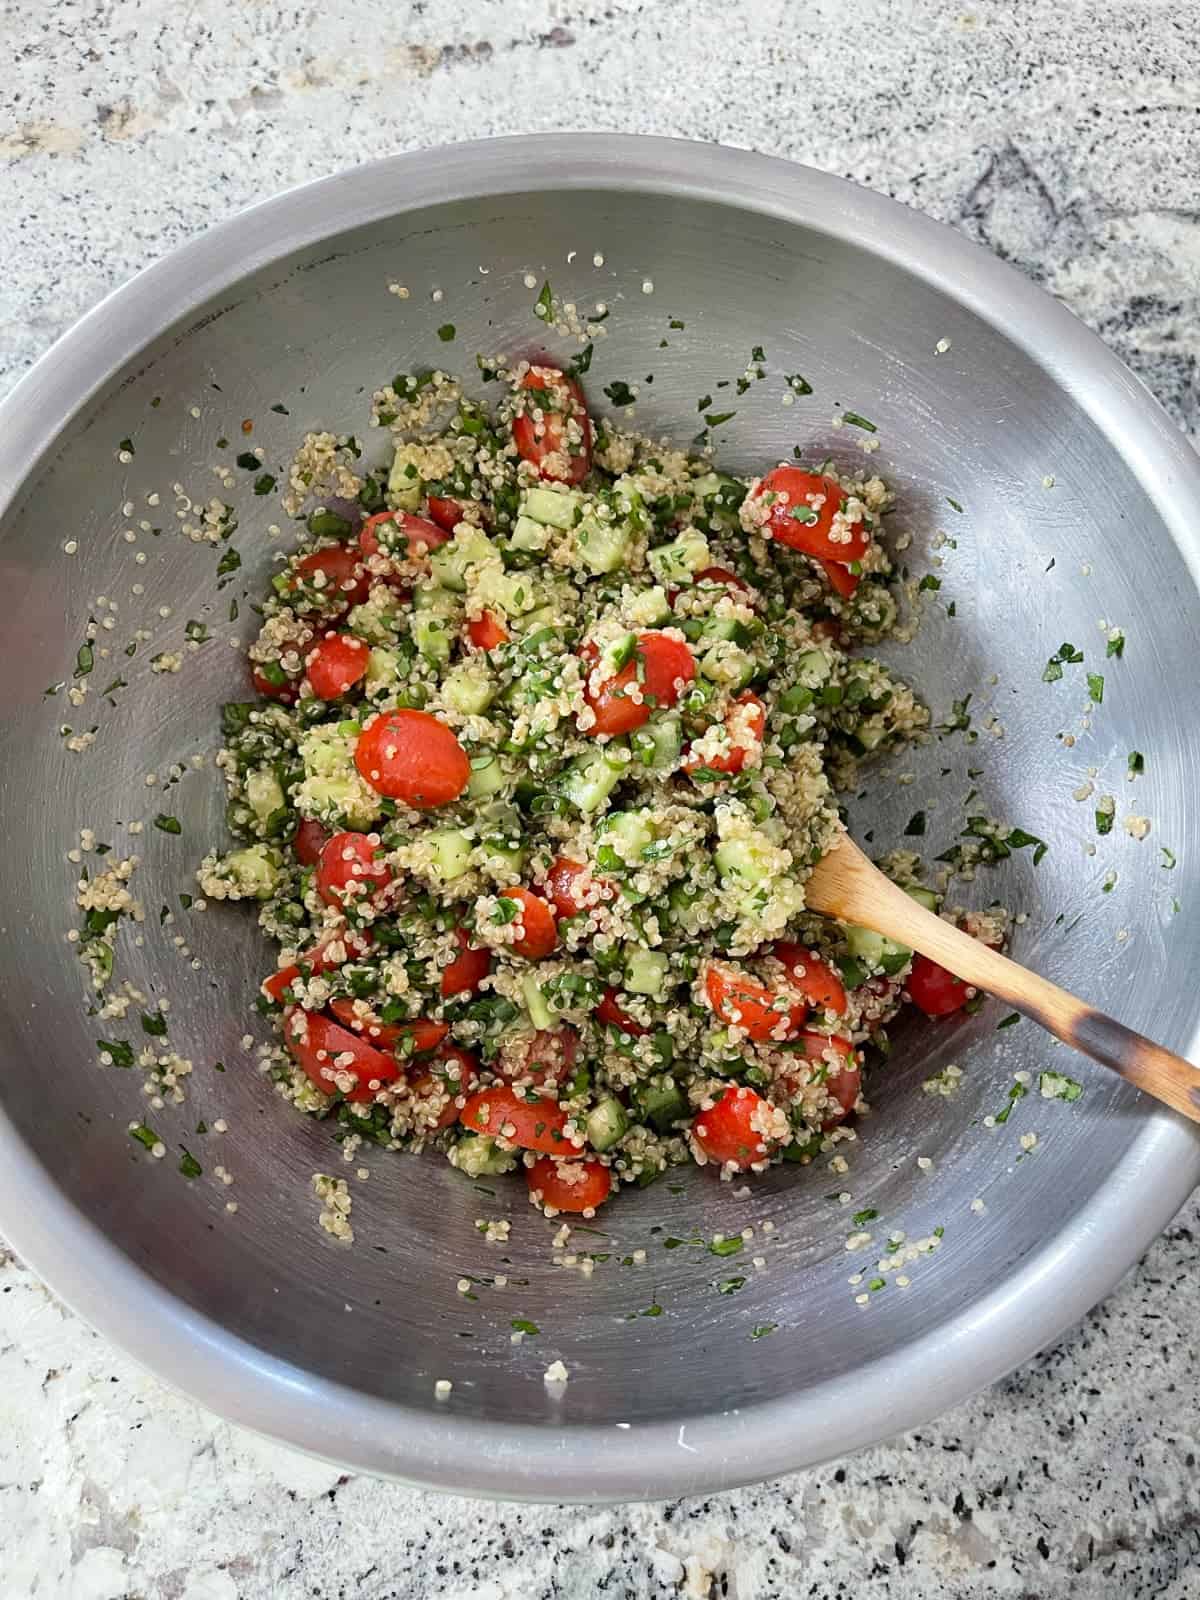 Stirring quinoa tabbouleh in mixing bowl with wooden spoon.